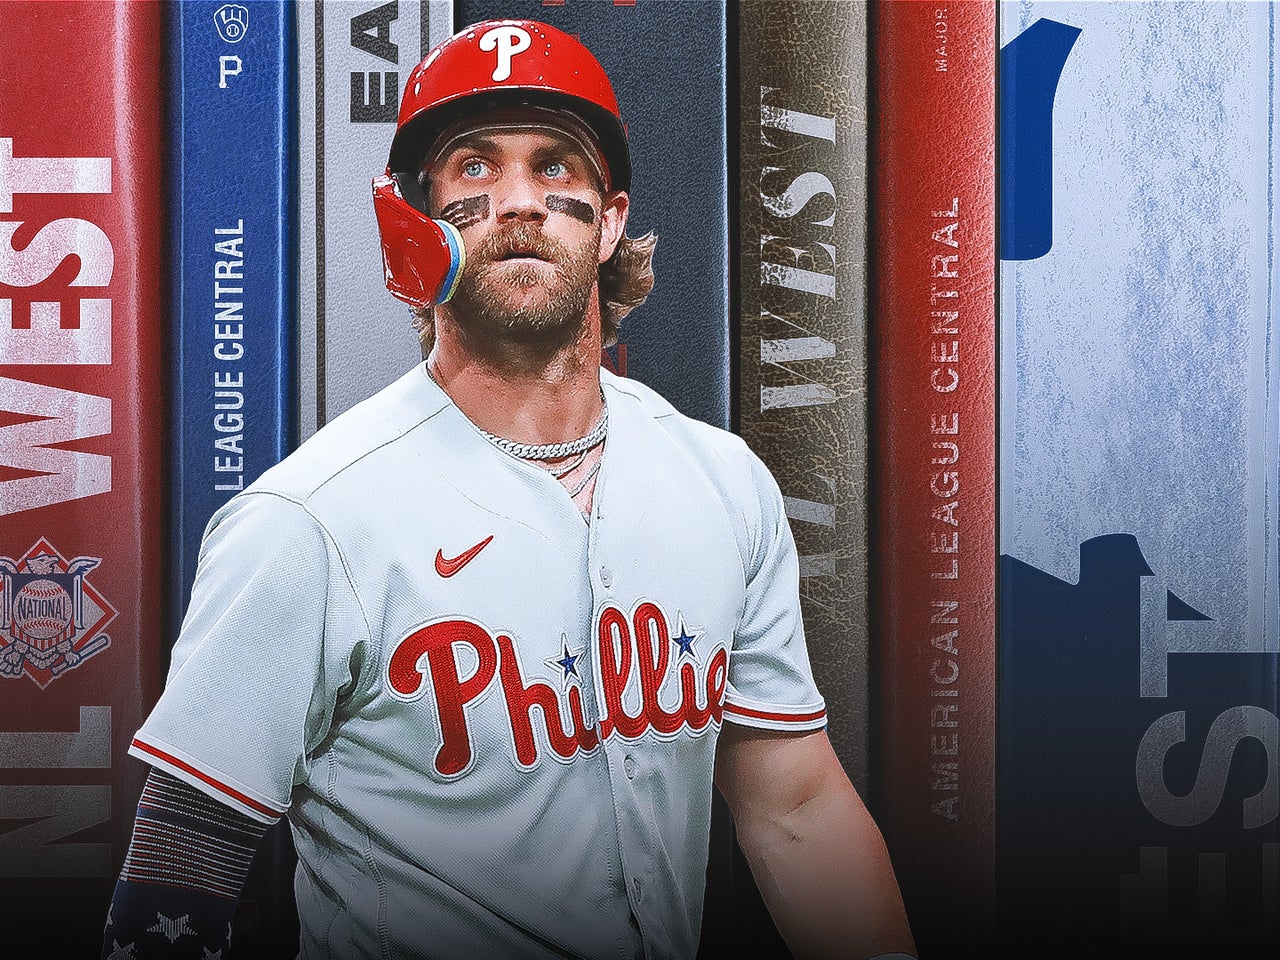 In two years with the Phillies, Bryce Harper has entered a different stage  of his life and career